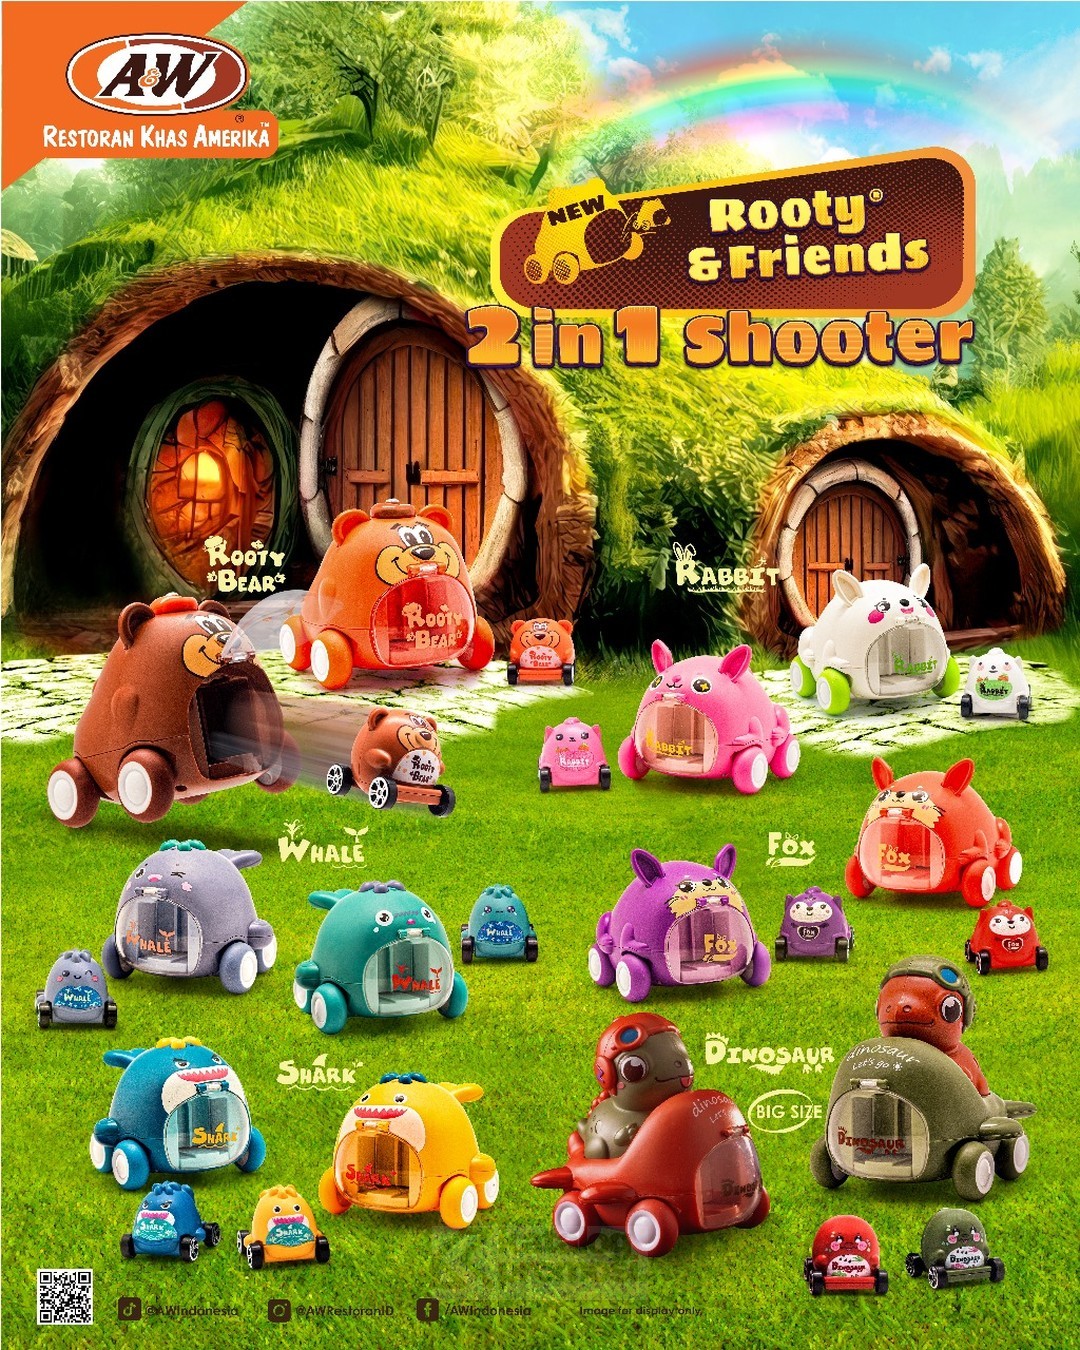 Promo A&W Combo Rooty & Friends 2 in 1 Shooter mulai Rp. 100.000